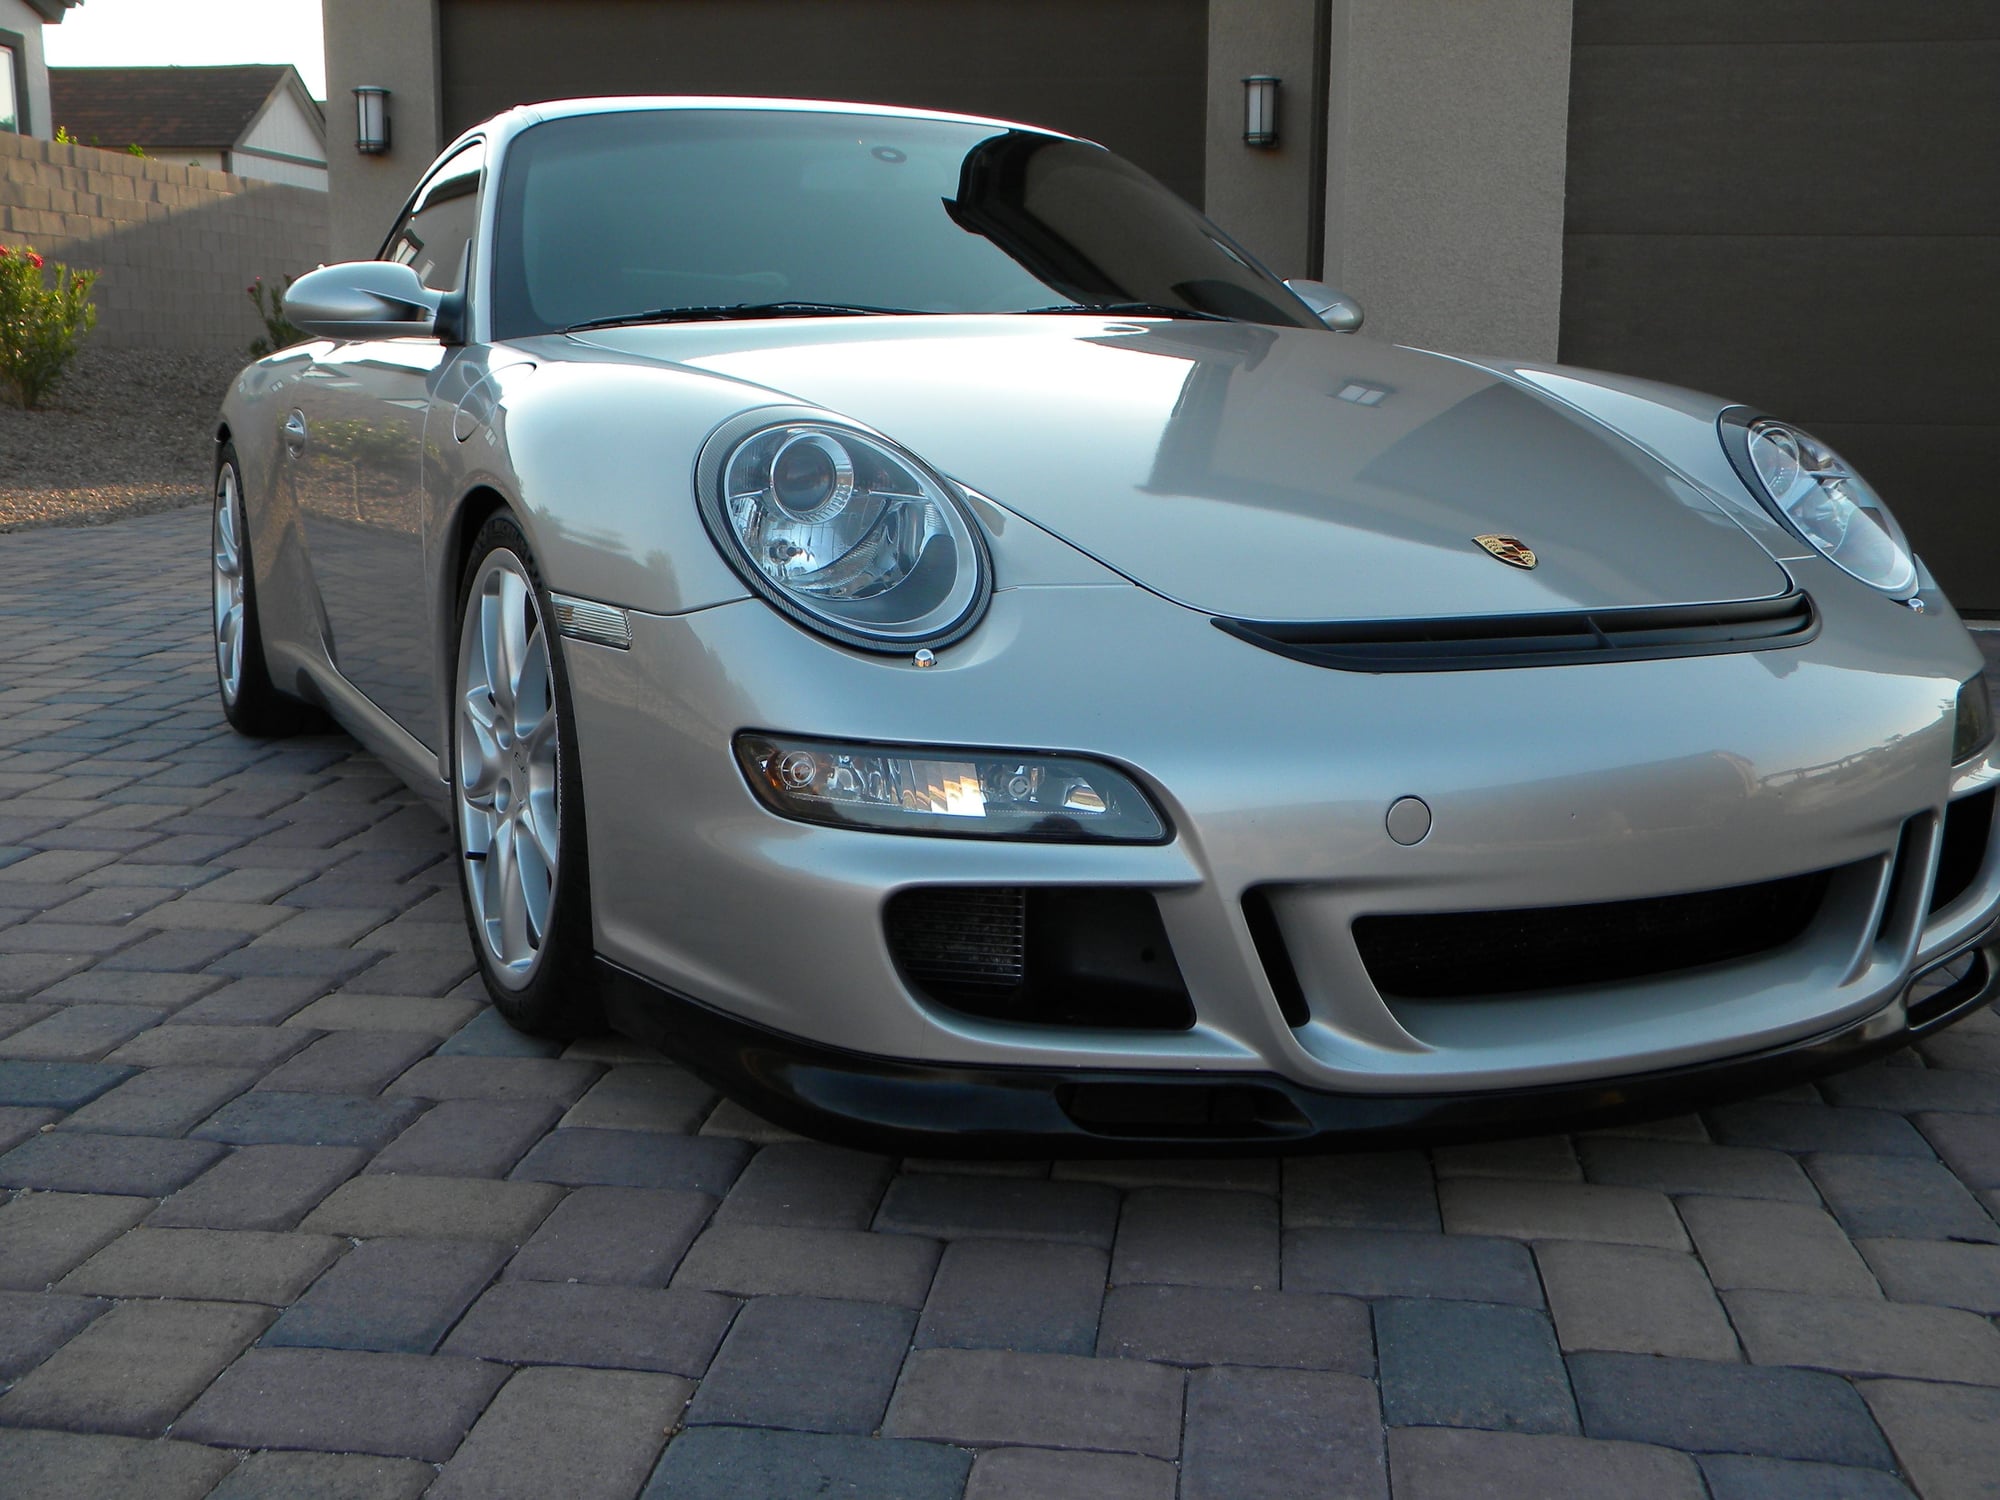 2007 Porsche GT3 - FS: 2007 997 GT3 - Used - VIN WPOAC29937S793270 - 35,000 Miles - 6 cyl - 2WD - Manual - Coupe - Silver - Henderson, NV 89002, United States